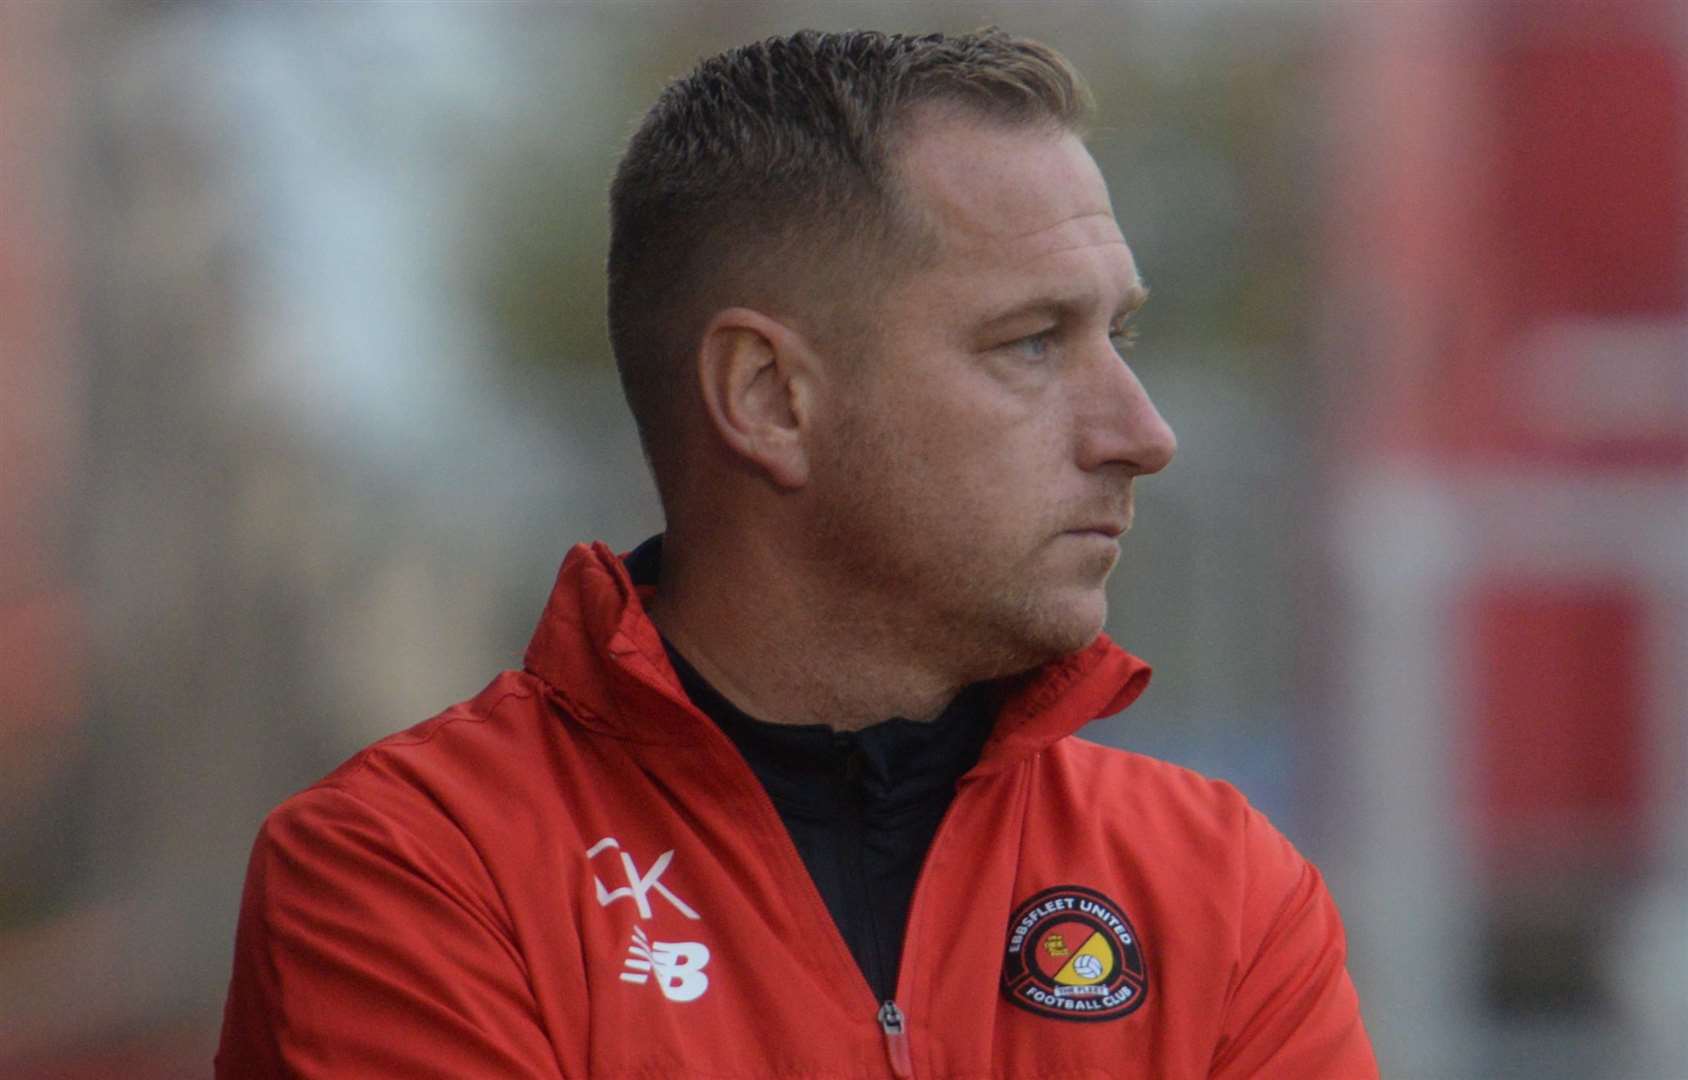 Ebbsfleet manager Dennis Kutrieb - was insulted by Havant boss Paul Doswell. Picture: Chris Davey